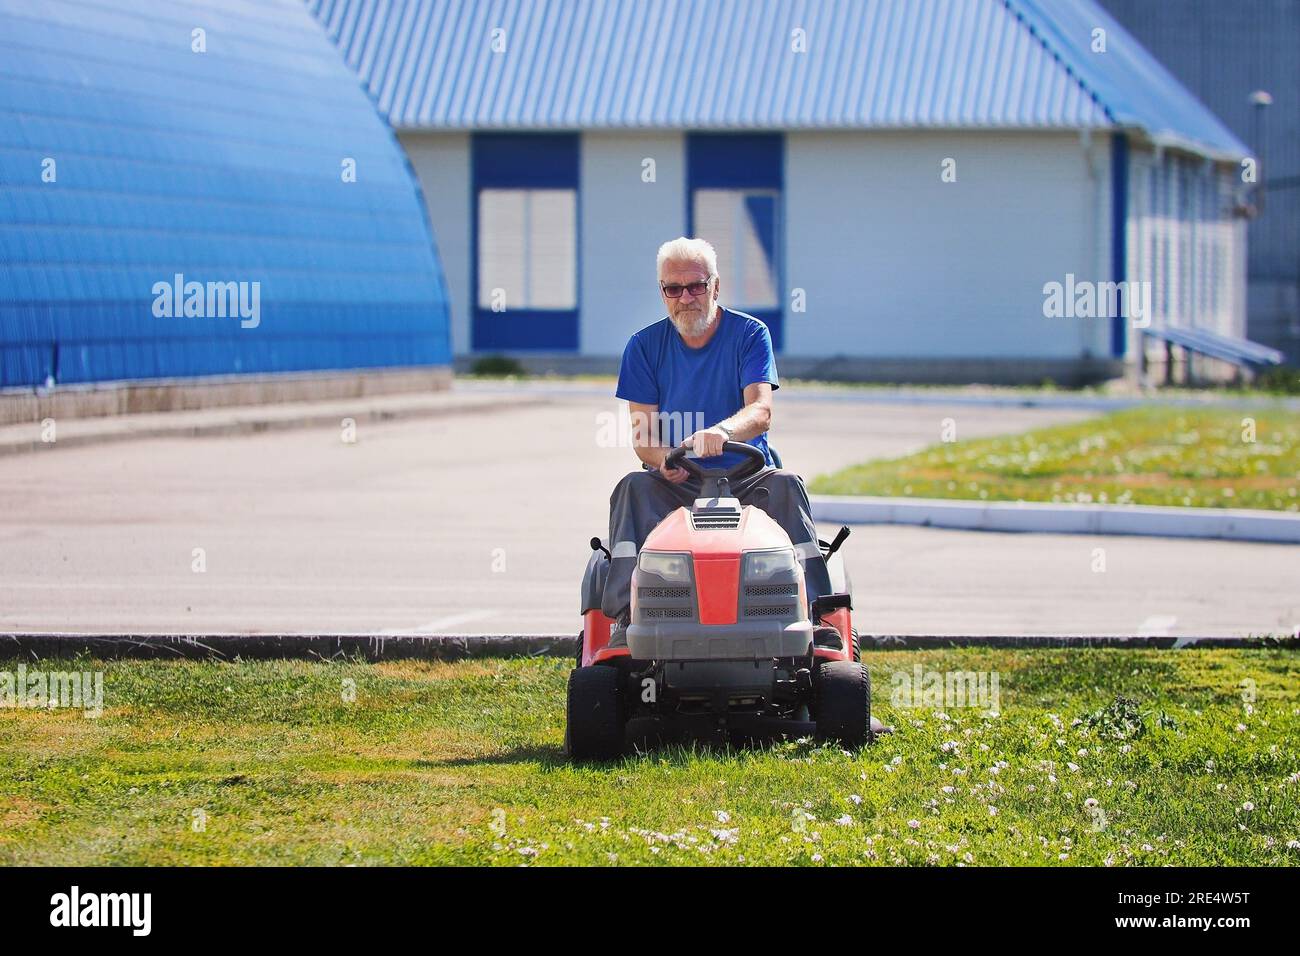 Elderly handyman gardener mows lawn on lawn mower tractor. Elderly man works as laborer. Mowing territory of industrial facility on summer day. Real workflow. Stock Photo